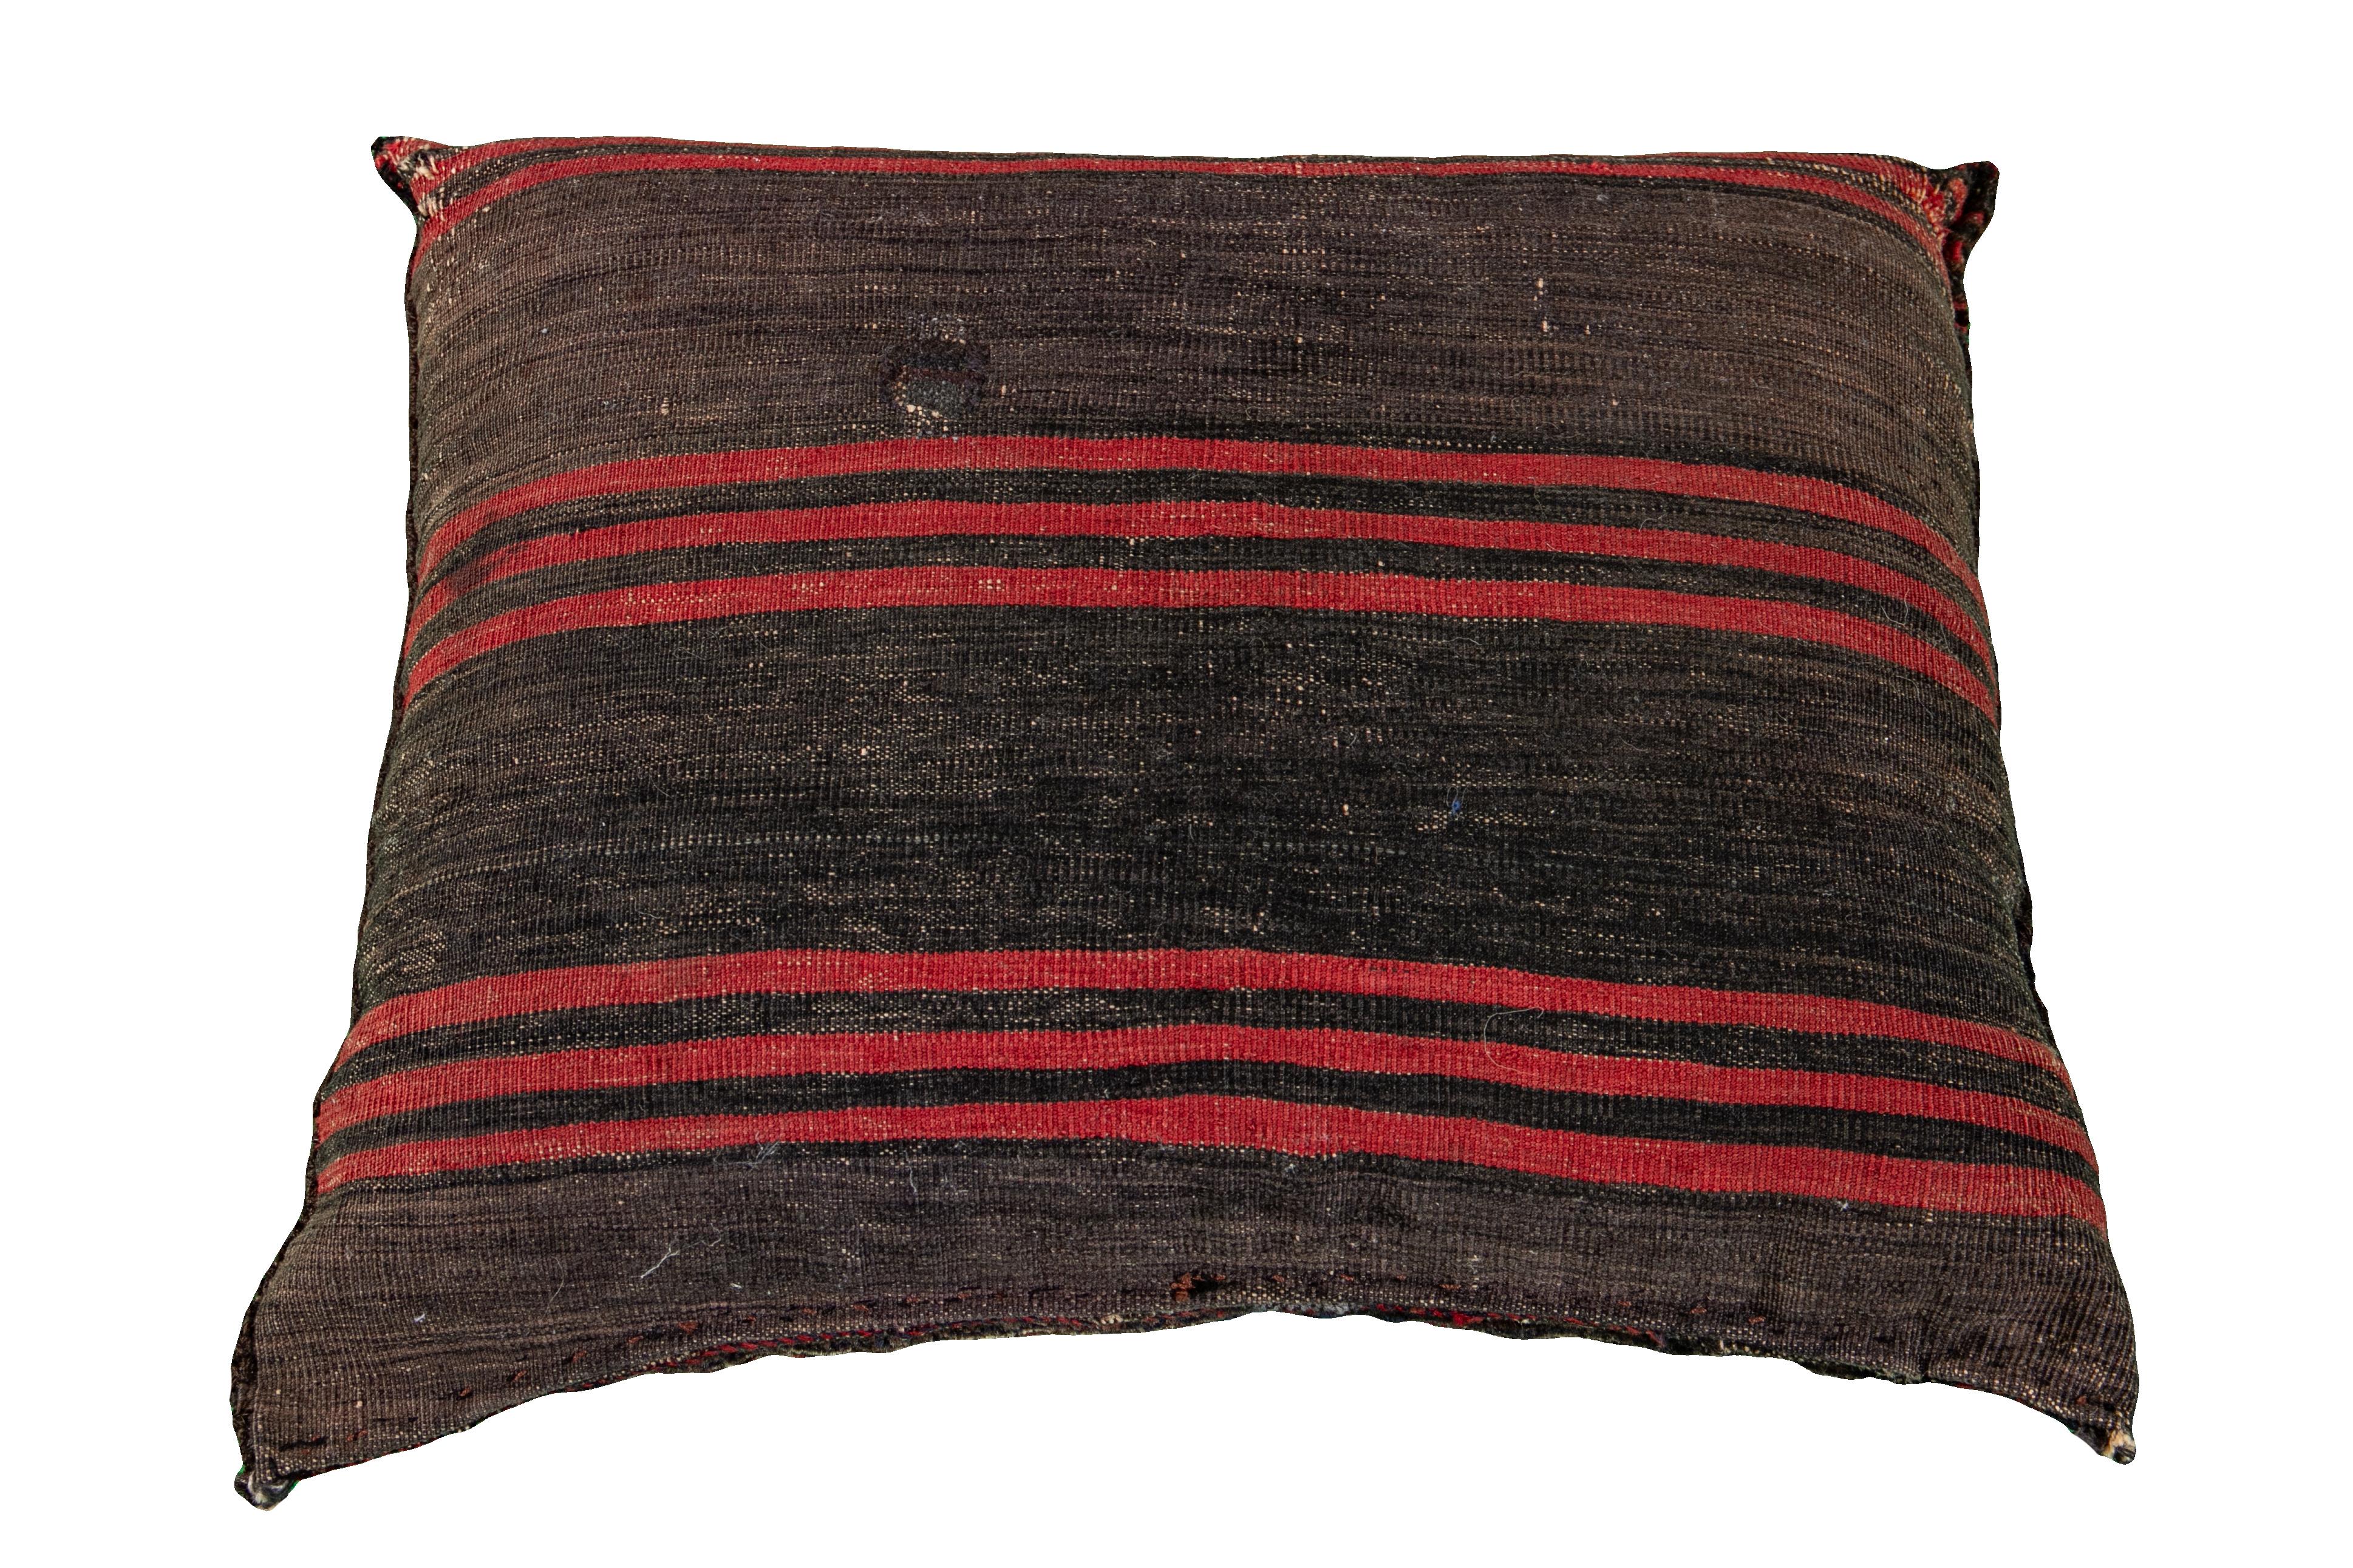 Beautiful vintage Persian Turkmen handmade pillow with a blue, gray field and accents of red, orange, and brown. This Turkmen Pillow features a Vintage take on a Classic design motif in vibrant colors to produce a vigorous experience of oriental